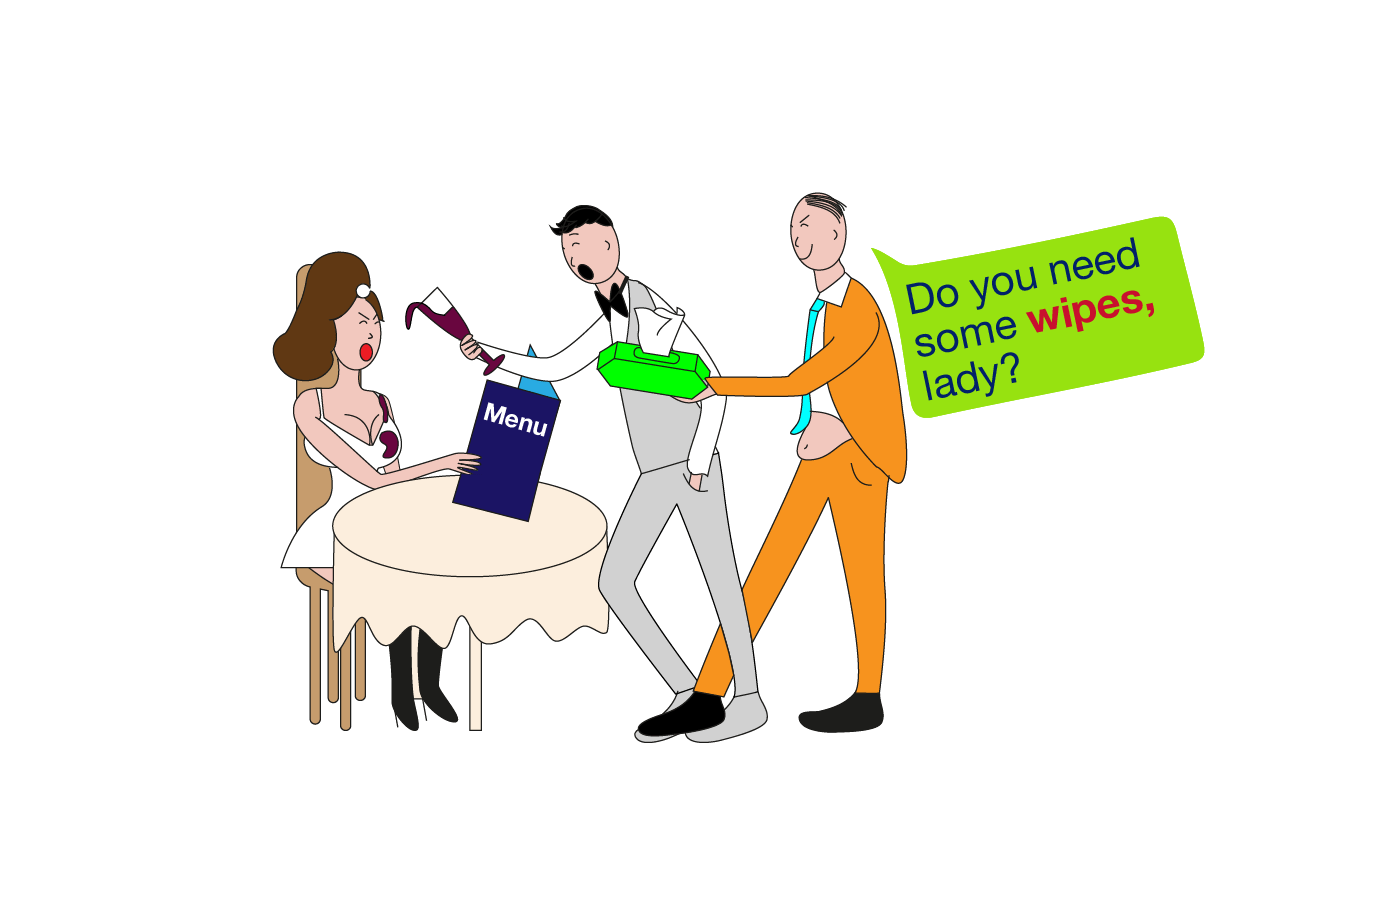 Wipes vocabulary meaning